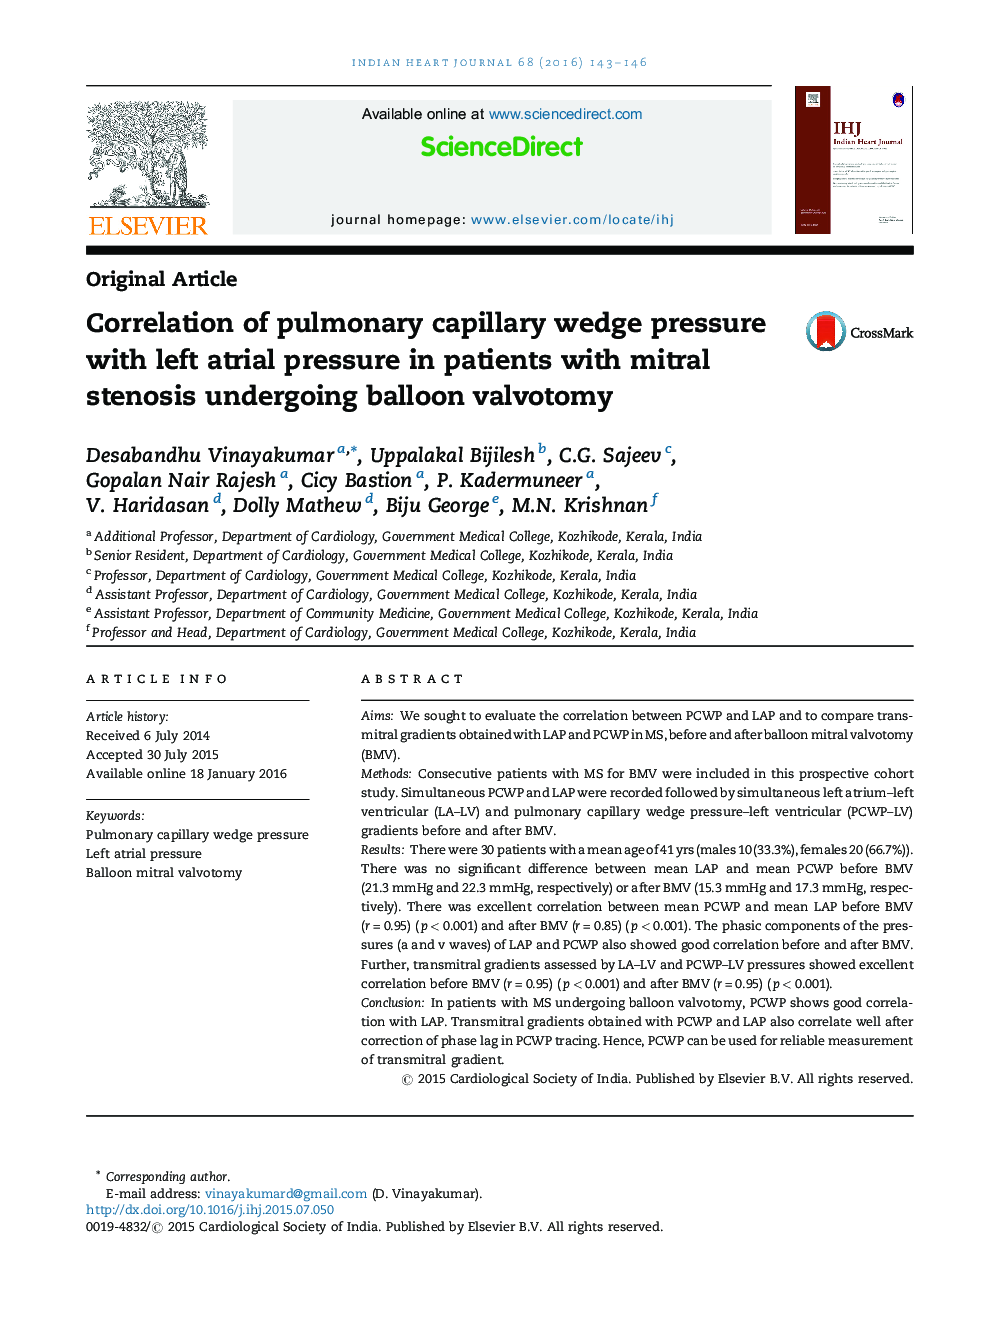 Correlation of pulmonary capillary wedge pressure with left atrial pressure in patients with mitral stenosis undergoing balloon valvotomy